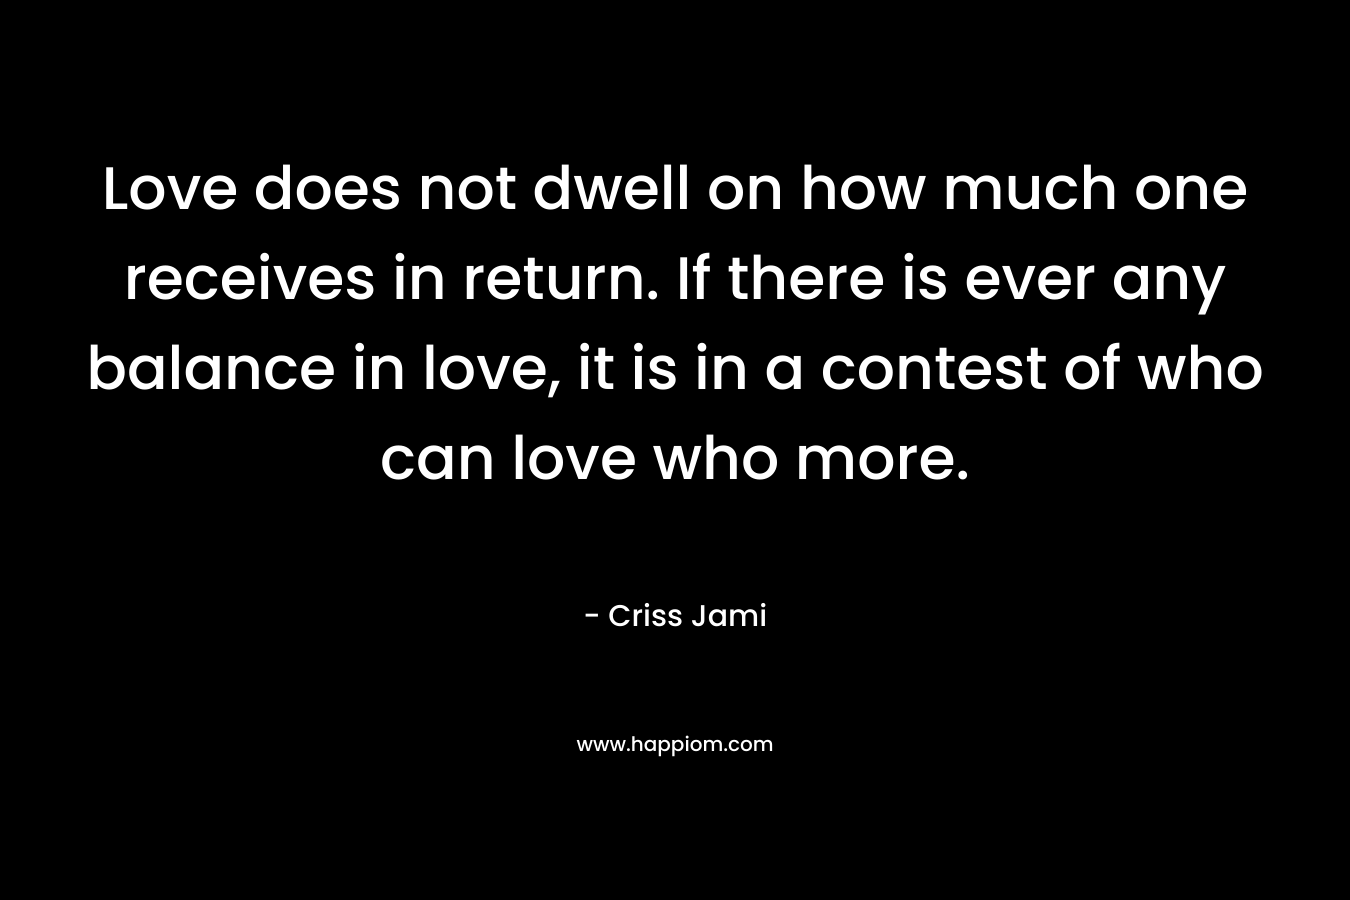 Love does not dwell on how much one receives in return. If there is ever any balance in love, it is in a contest of who can love who more.